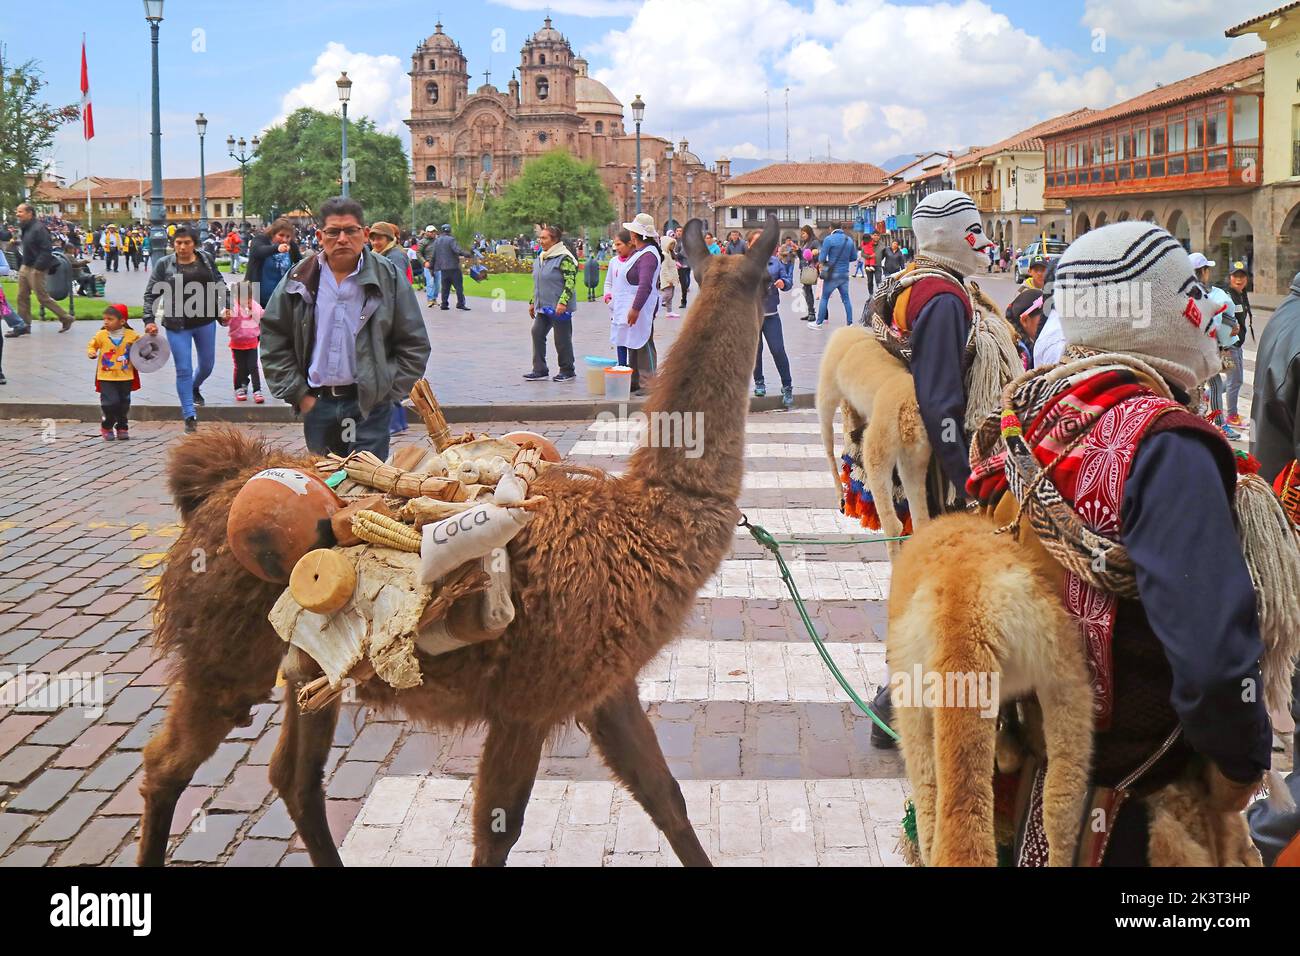 LLama Attending the Peruvian Parade Held on May 6th, 2018 on Plaza de Armas Square in Cusco, Peru, South America Stock Photo